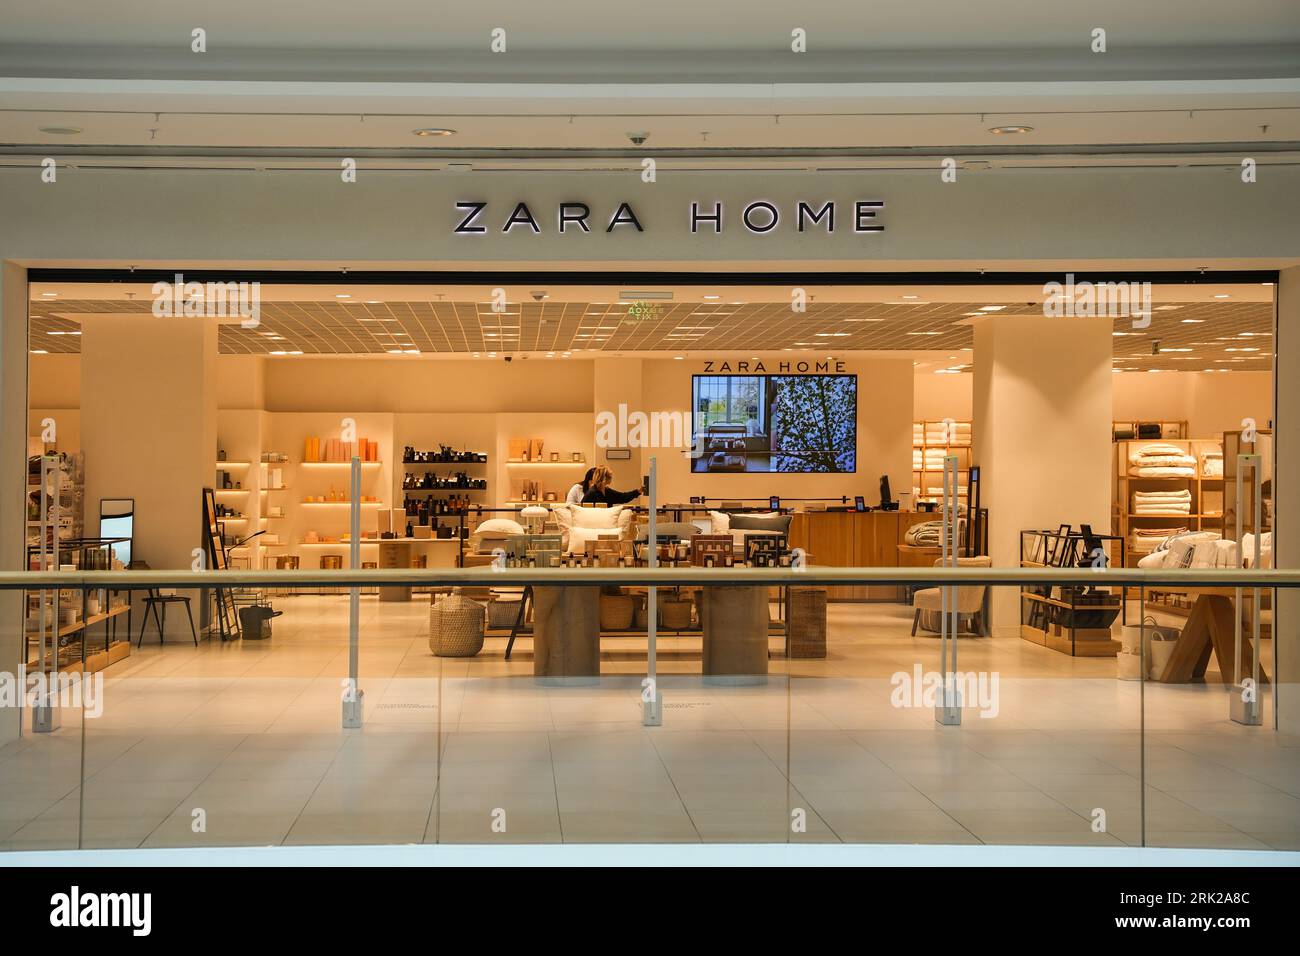 Almaty, Kazakhstan - August 17, 2023: Entrance to the Zara Home boutique in the mall. Houzefold brand products Stock Photo